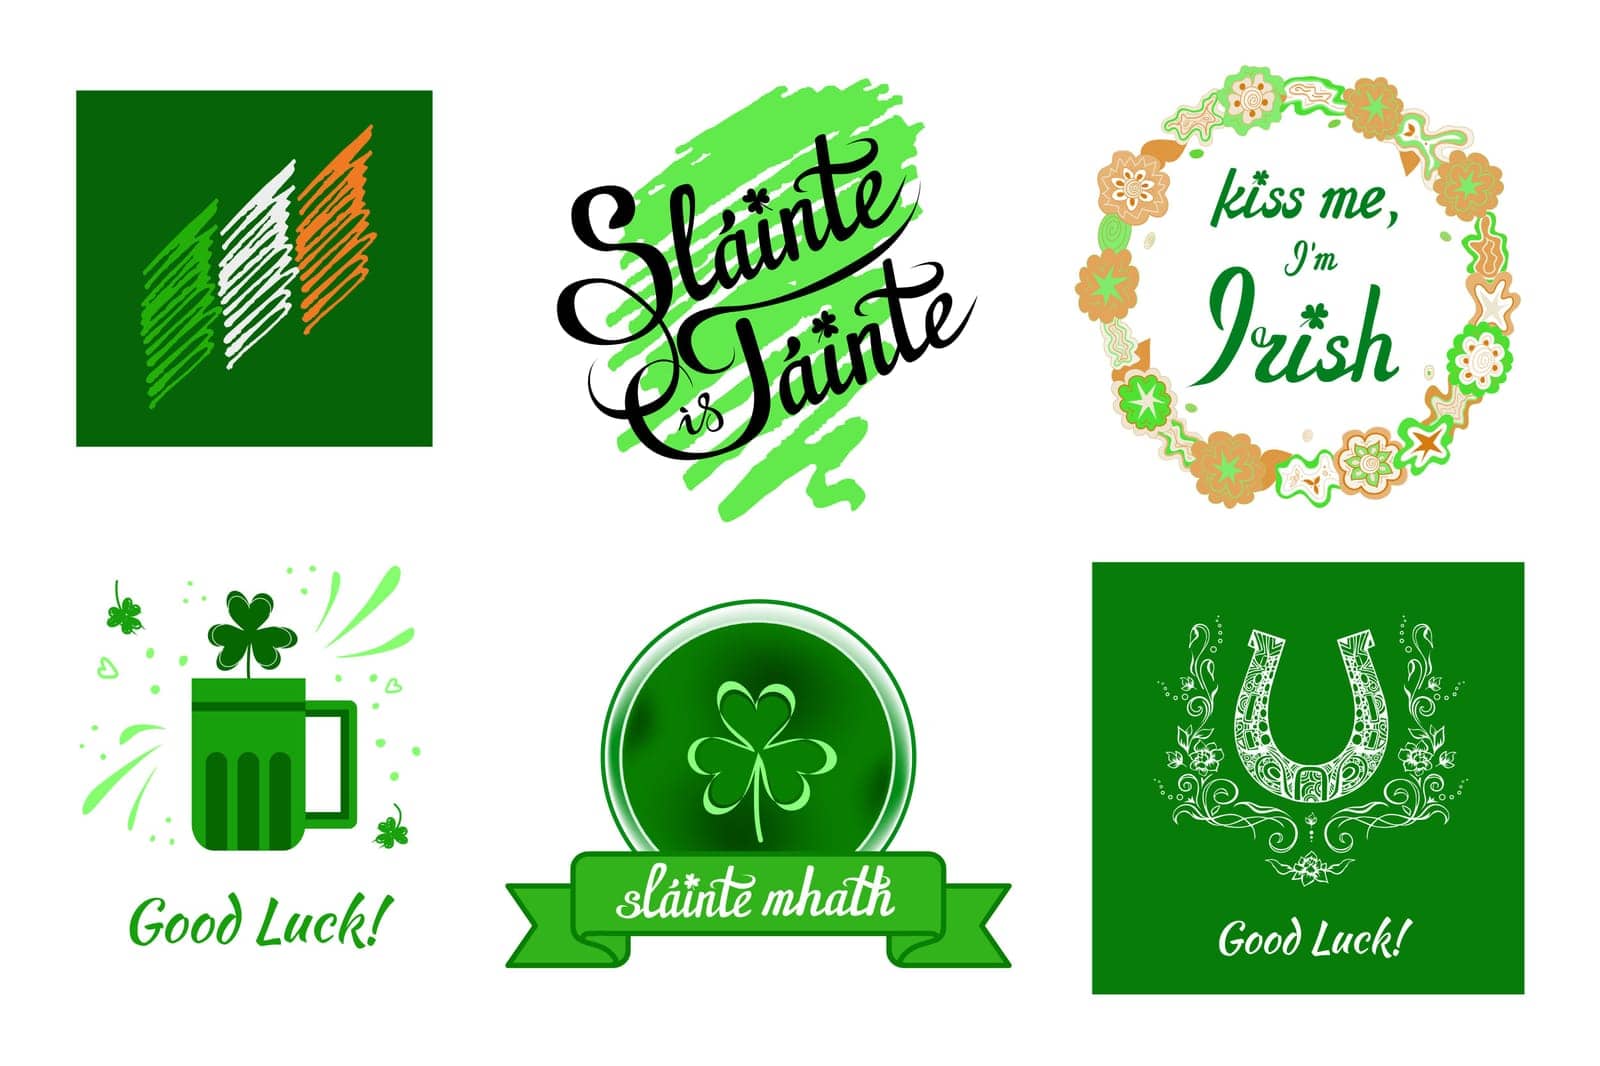 Irish elements, emblems with national flag, wishes of health and luck, beer mug, shamrock, joke in flower wreath, horseshoe. Greeting ornate vector designs for prints